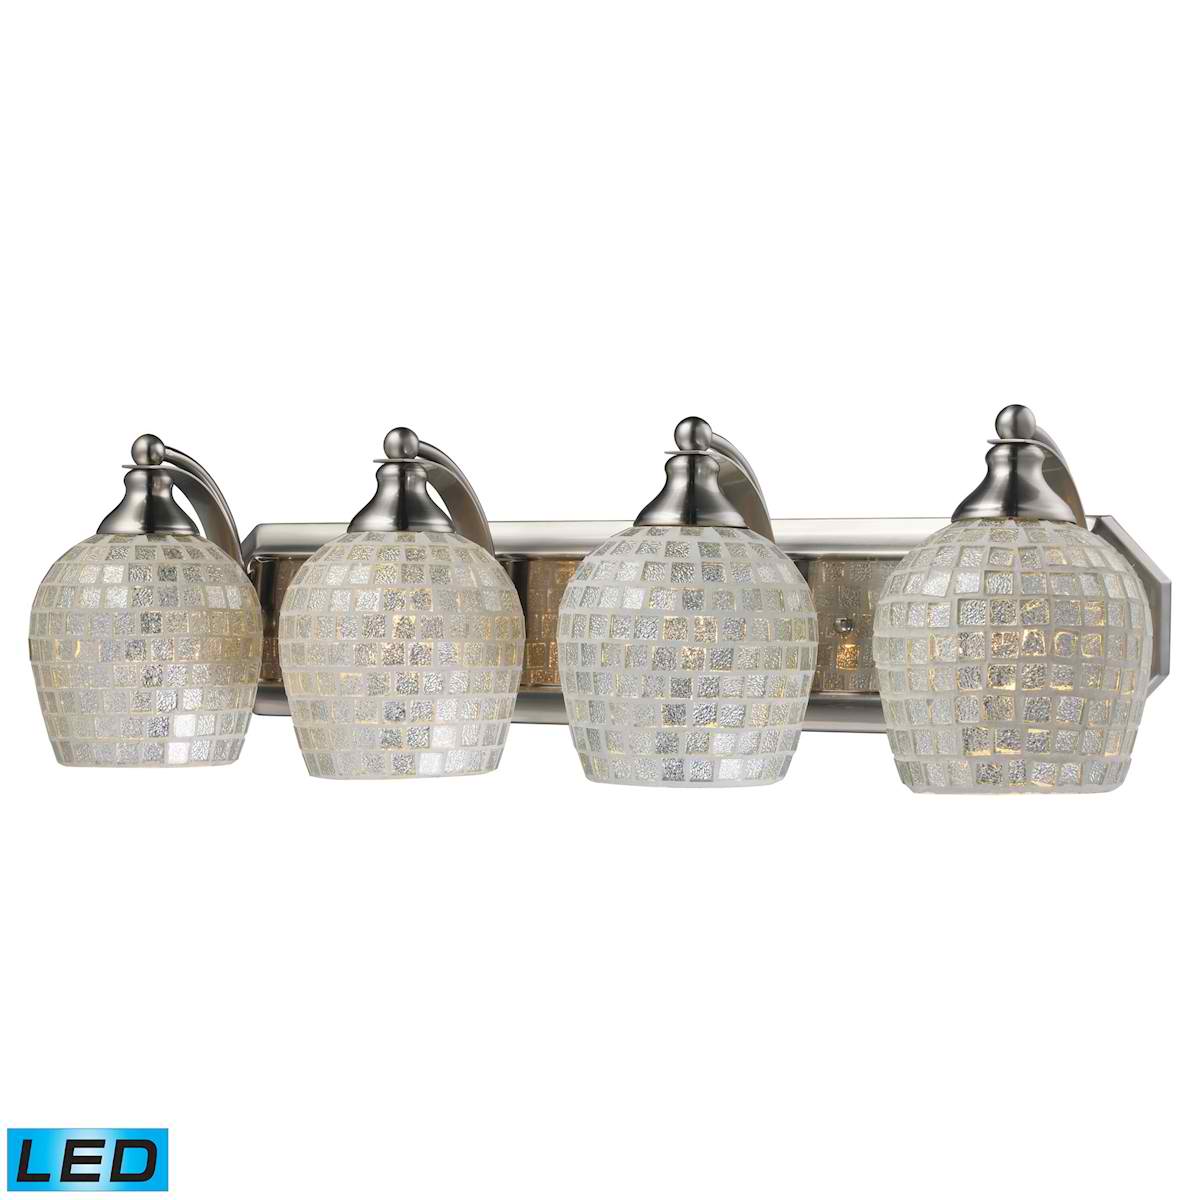 4 Light Vanity in Satin Nickel and Silver Mosaic Glass - LED, 800 Lumens (3200 Lumens Total) with Full Scale